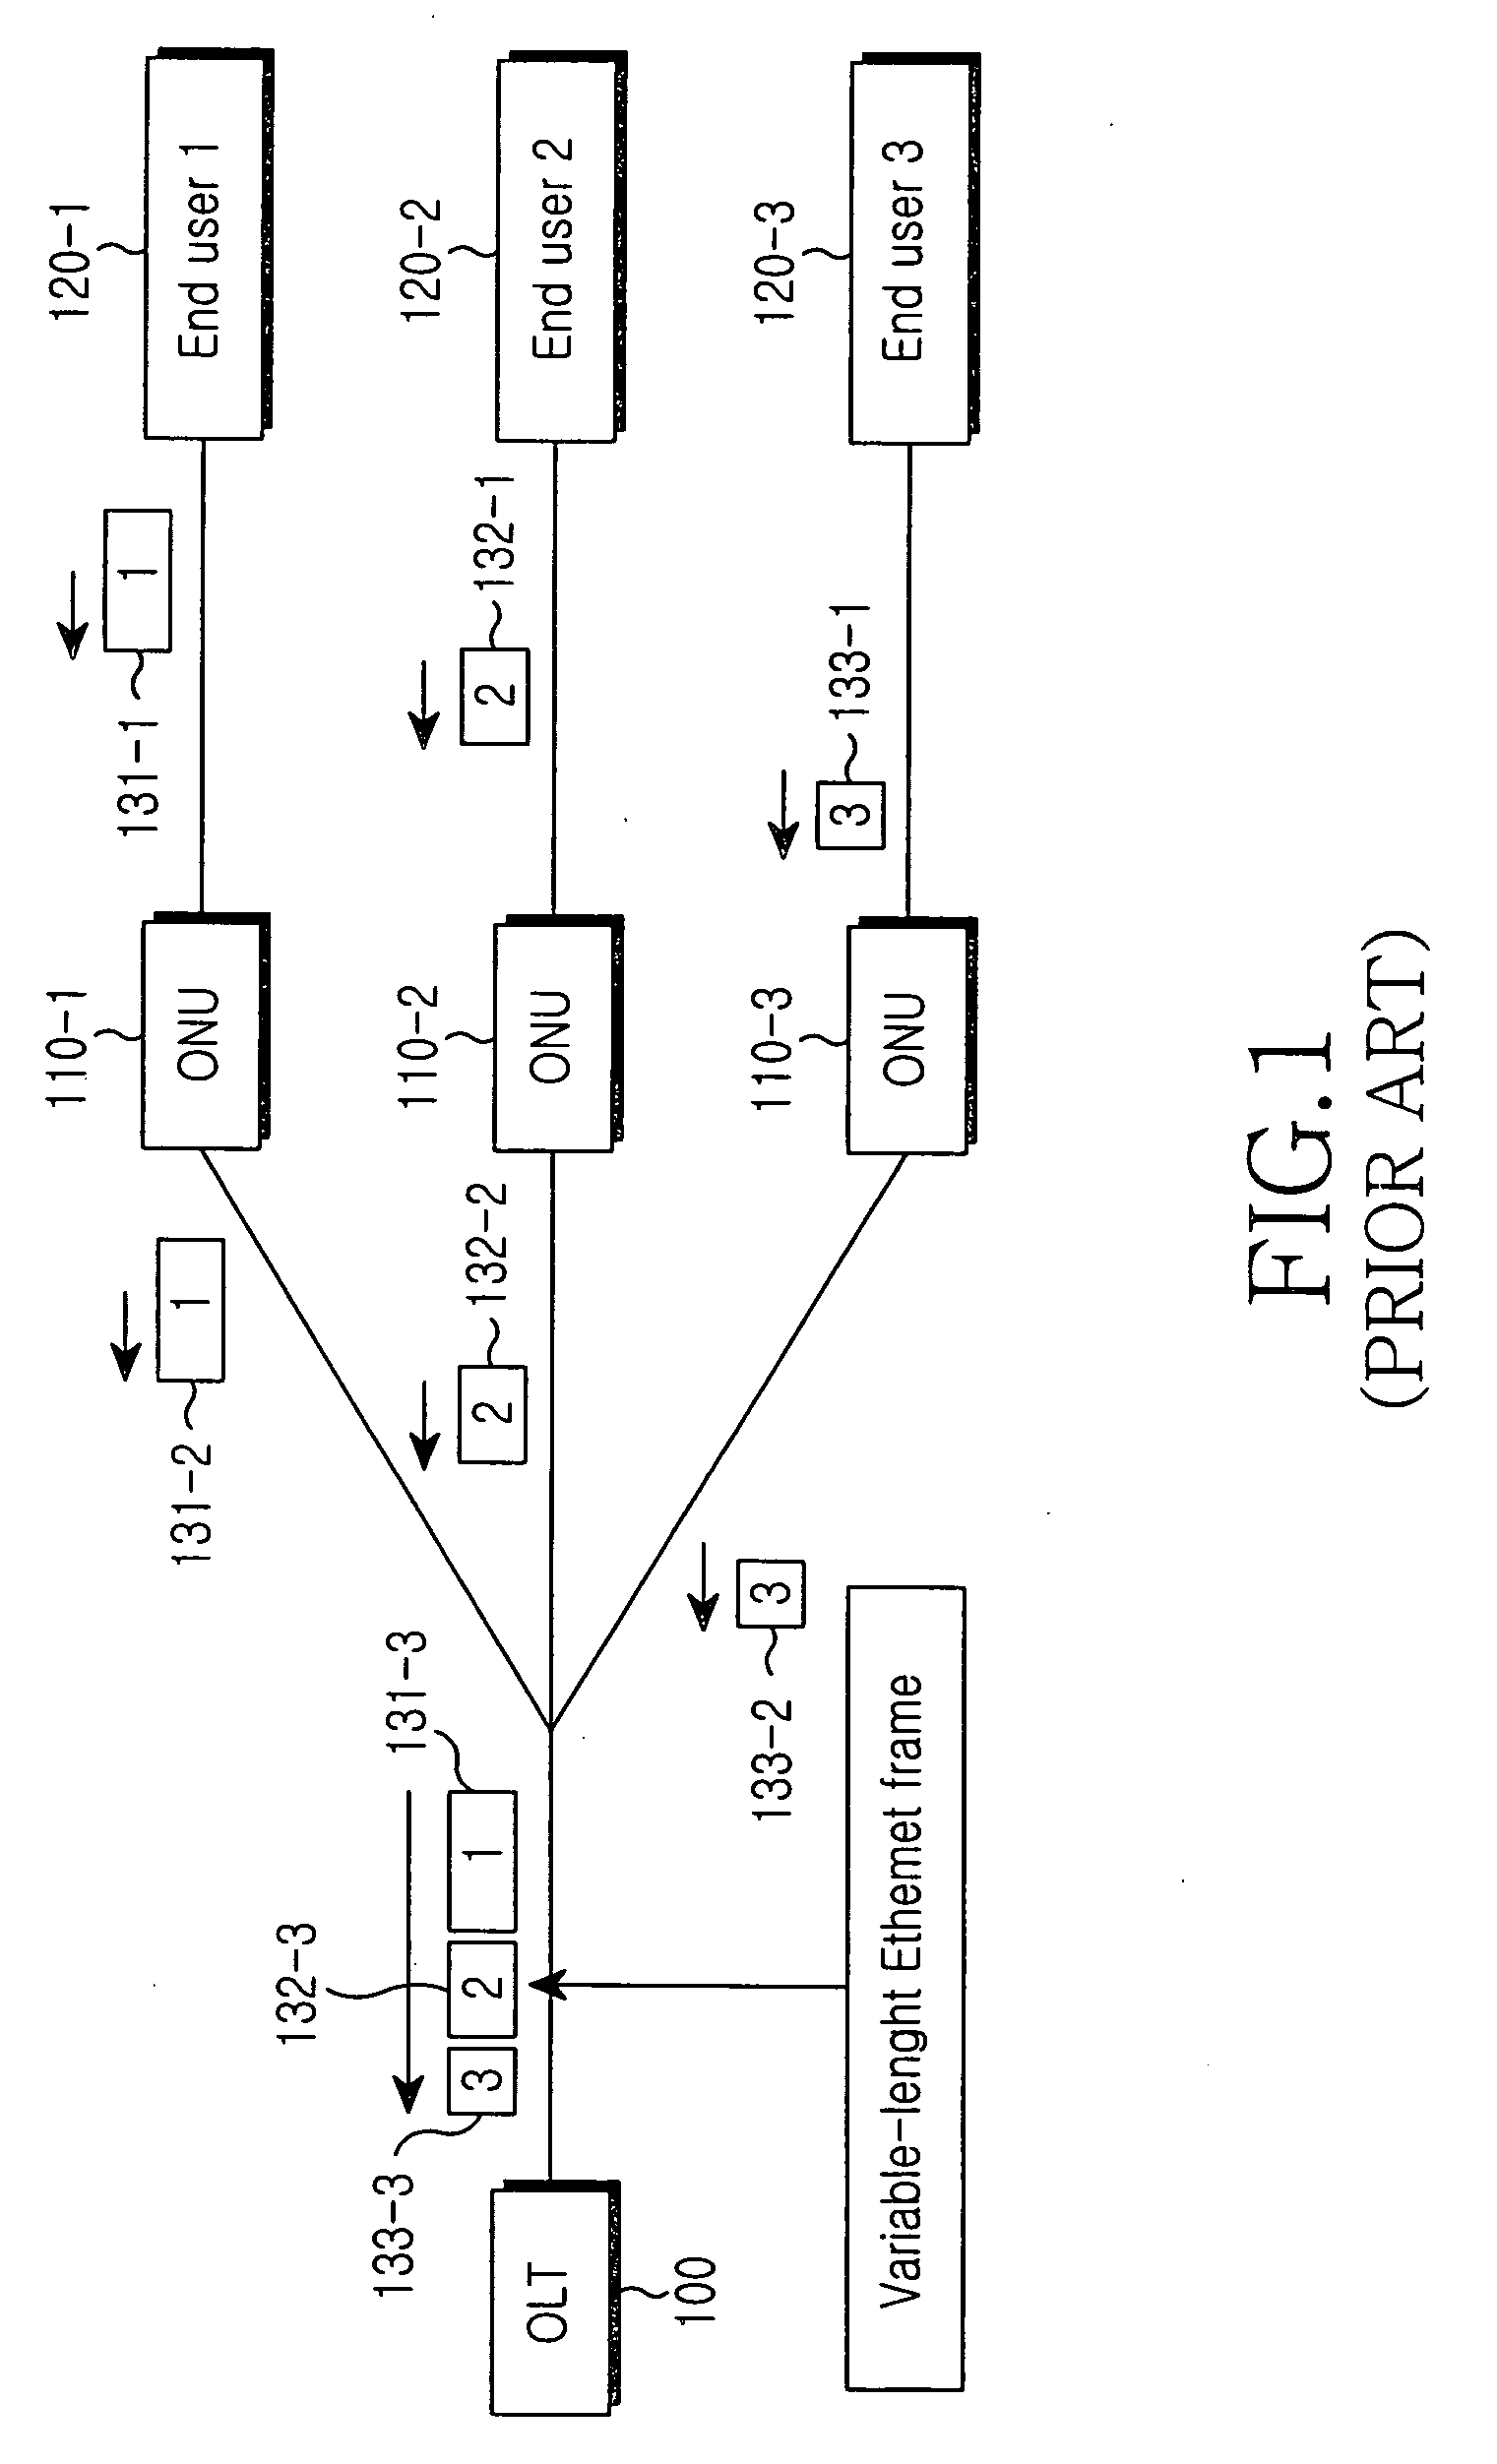 Multipoint gating control block in an ethernet passive optical network and method therefor